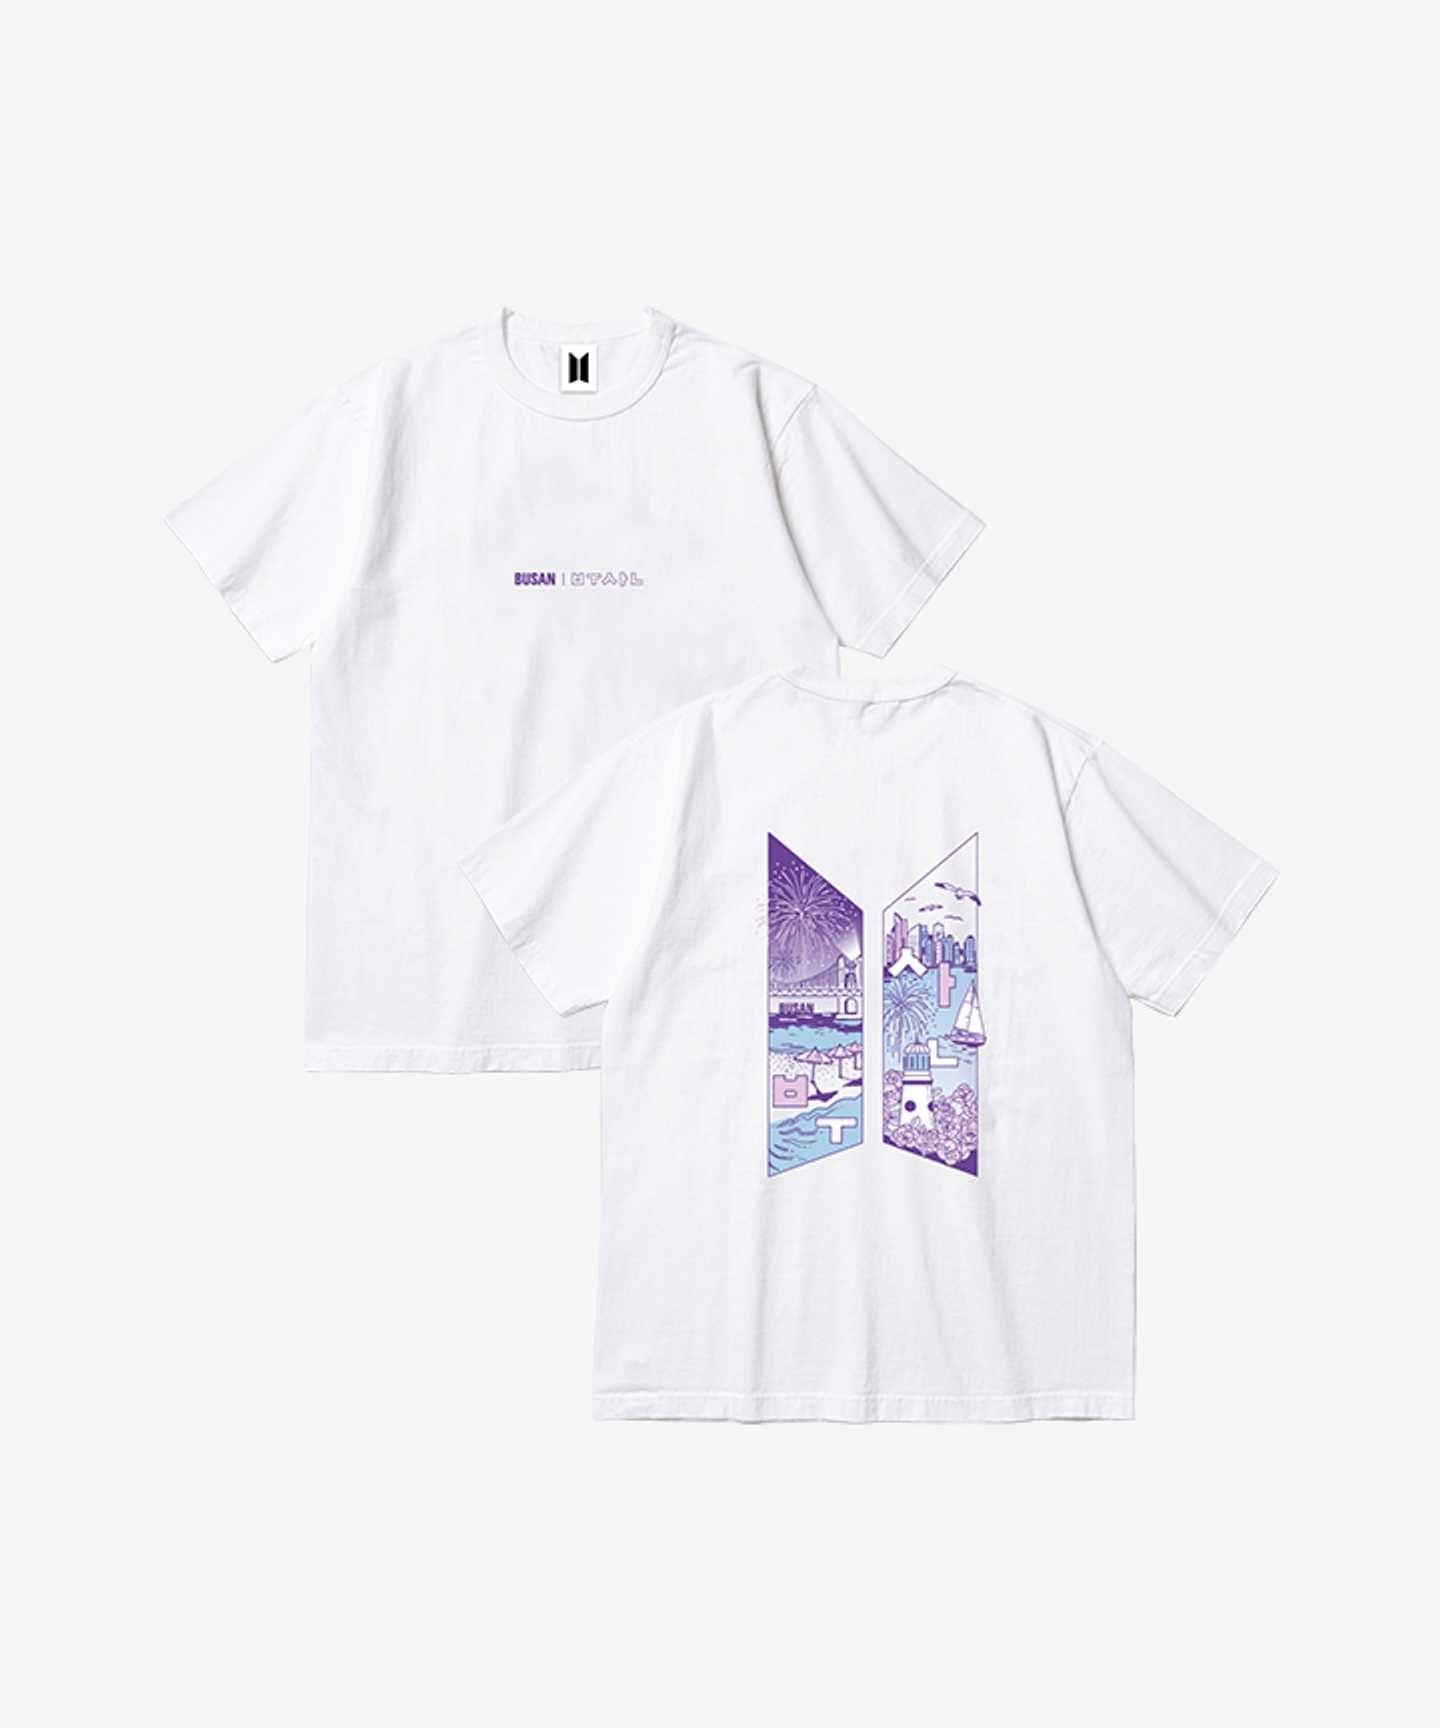 Yet To Come in Busan Busan S/S Tshirt Big Hit